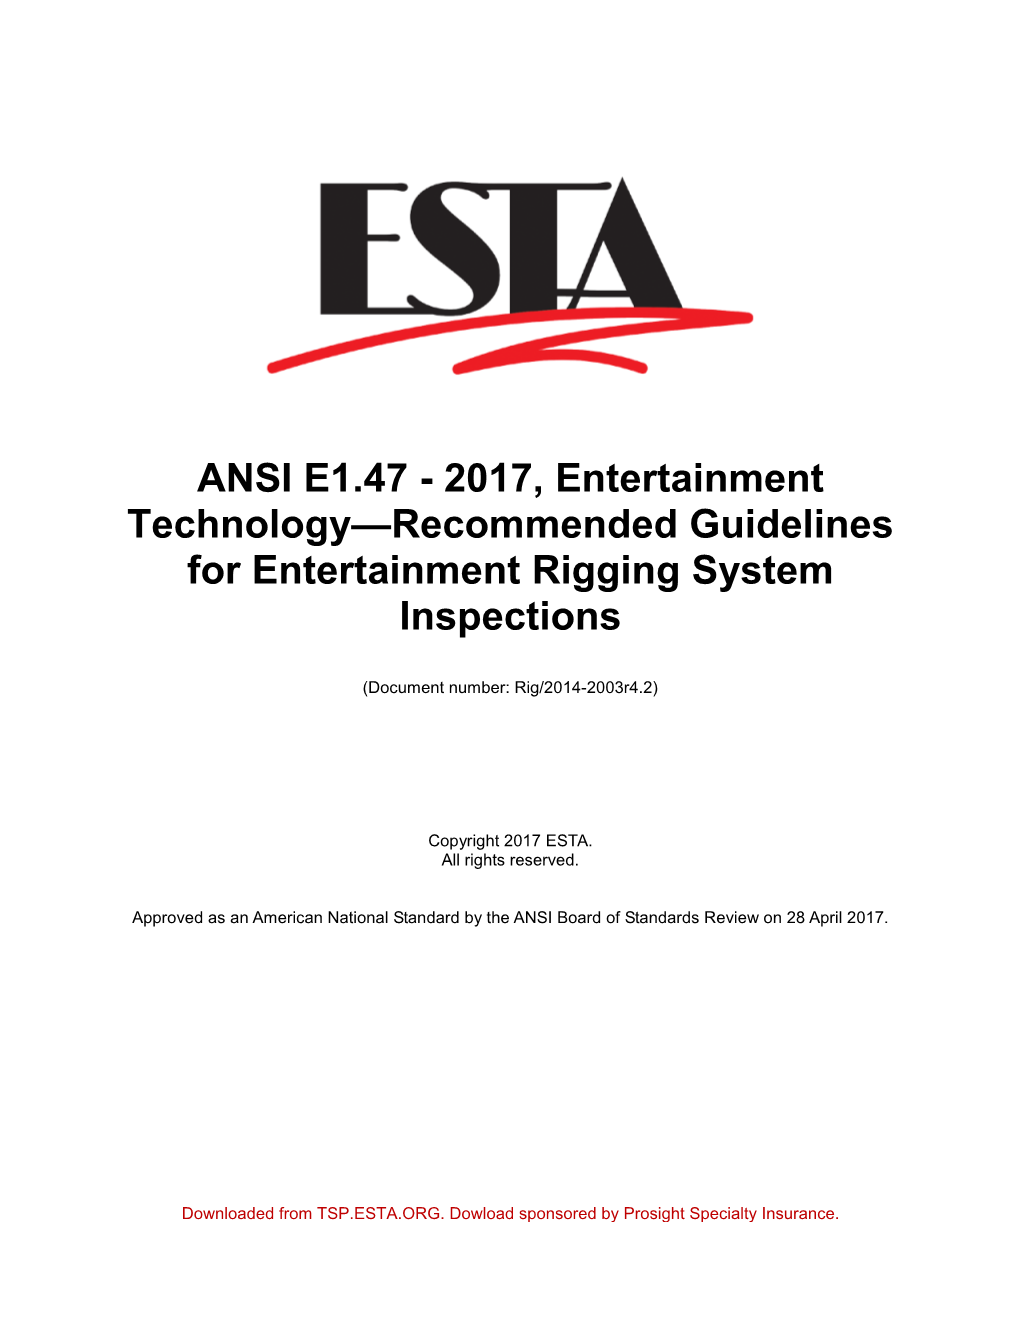 ANSI E1.47 - 2017, Entertainment Technology—Recommended Guidelines for Entertainment Rigging System Inspections